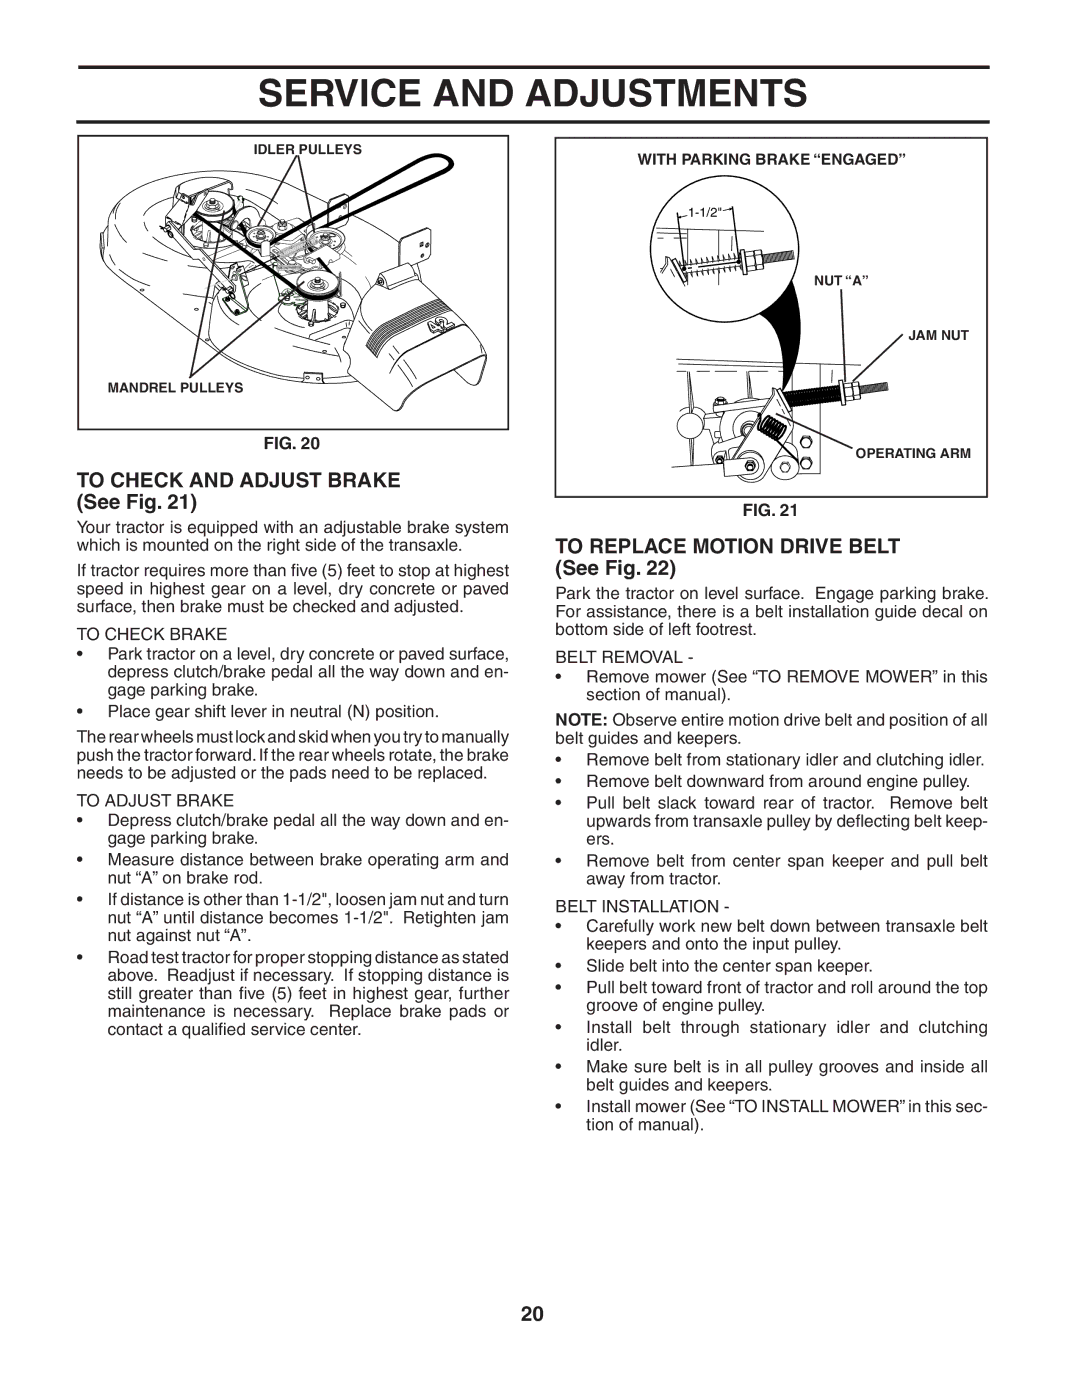 Poulan 954570772 To Check and Adjust Brake See Fig, To Replace Motion Drive Belt See Fig, To Check Brake, To Adjust Brake 